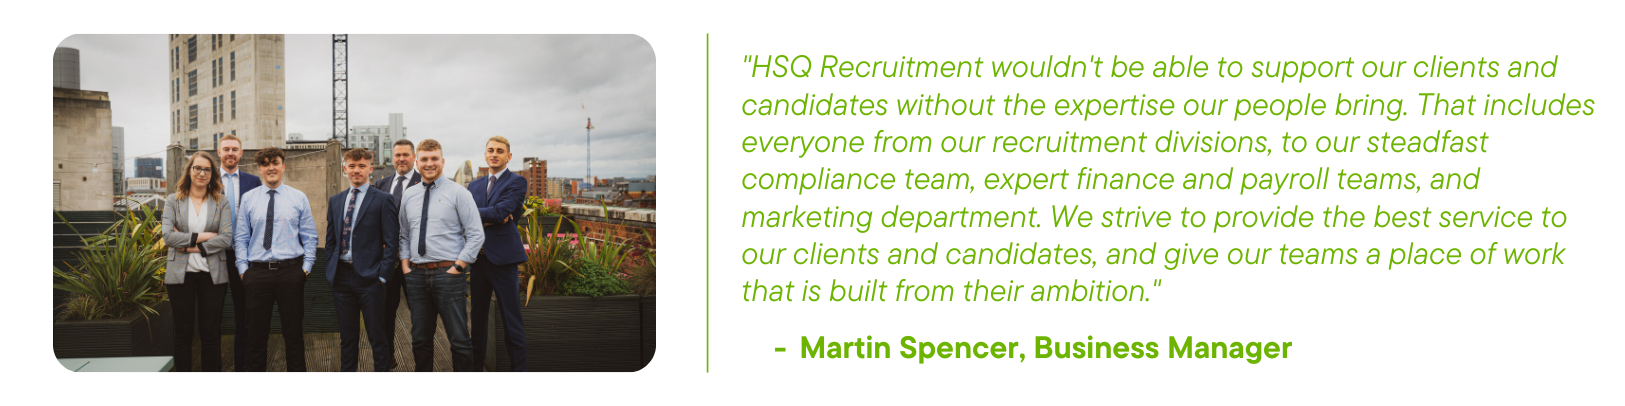 HSQ Recruitment Team with quote from Business Manager